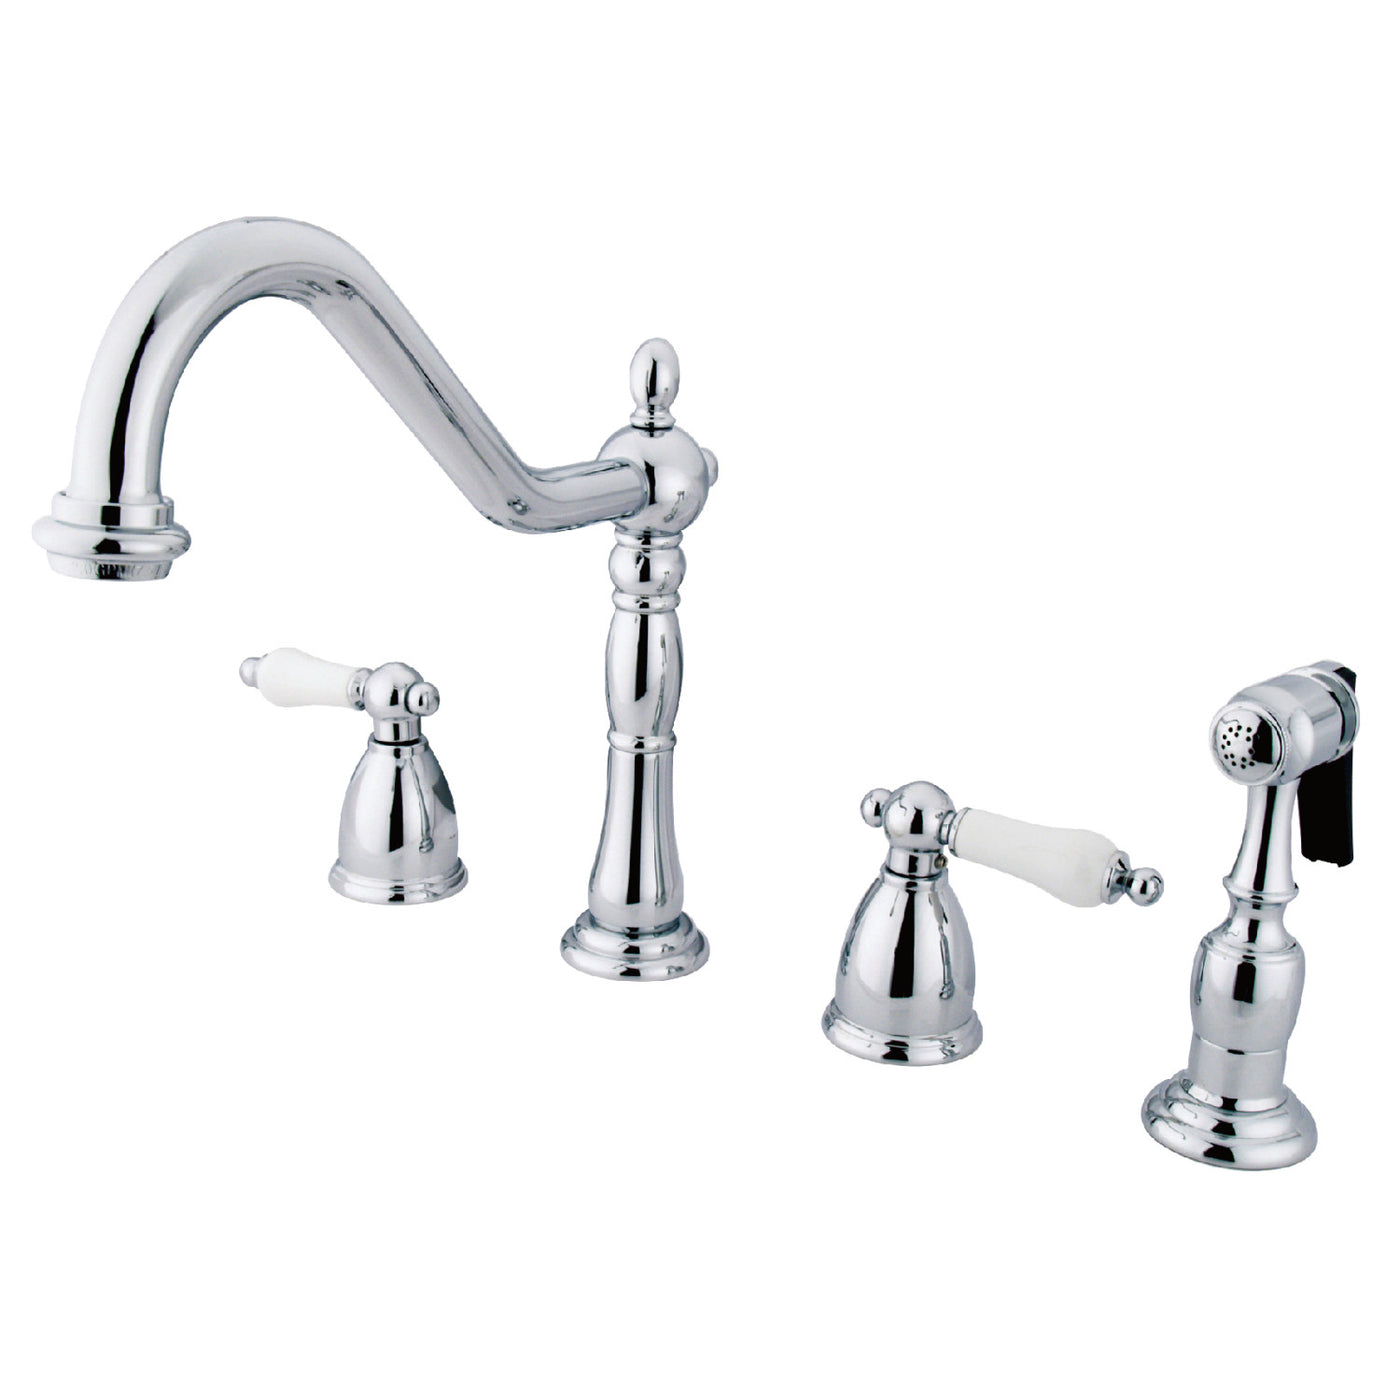 Elements of Design EB1791PLBS Widespread Kitchen Faucet with Brass Sprayer, Polished Chrome